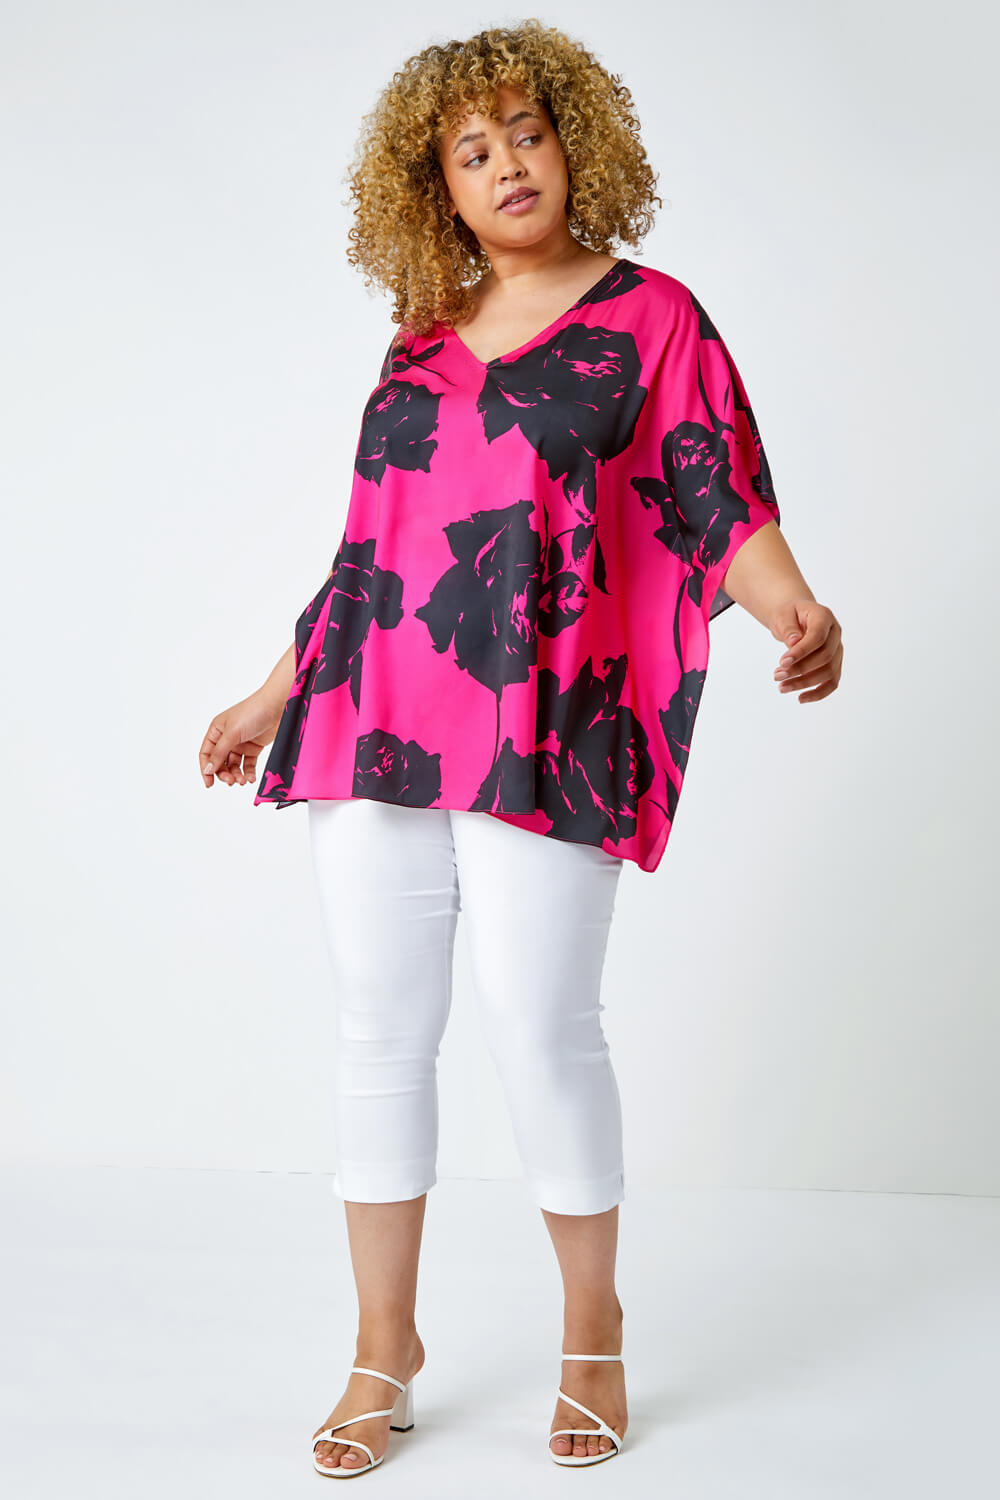 PINK Curve Floral Print Chiffon Top, Image 2 of 5